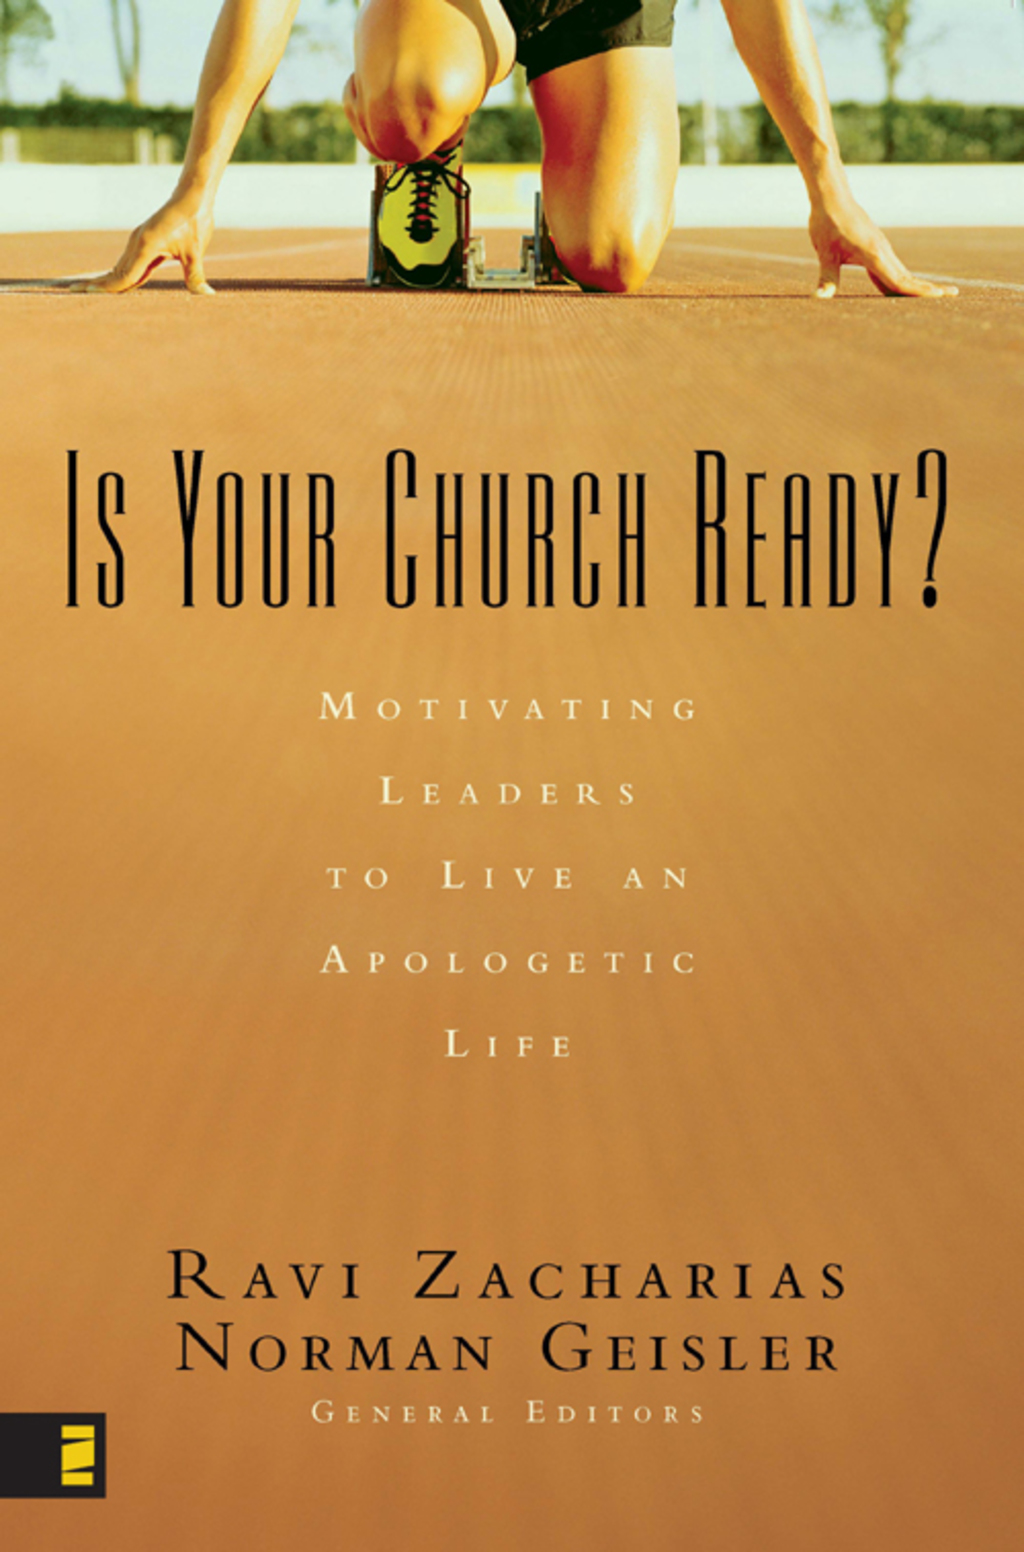 Is Your Church Ready? (eBook) - Zondervan,